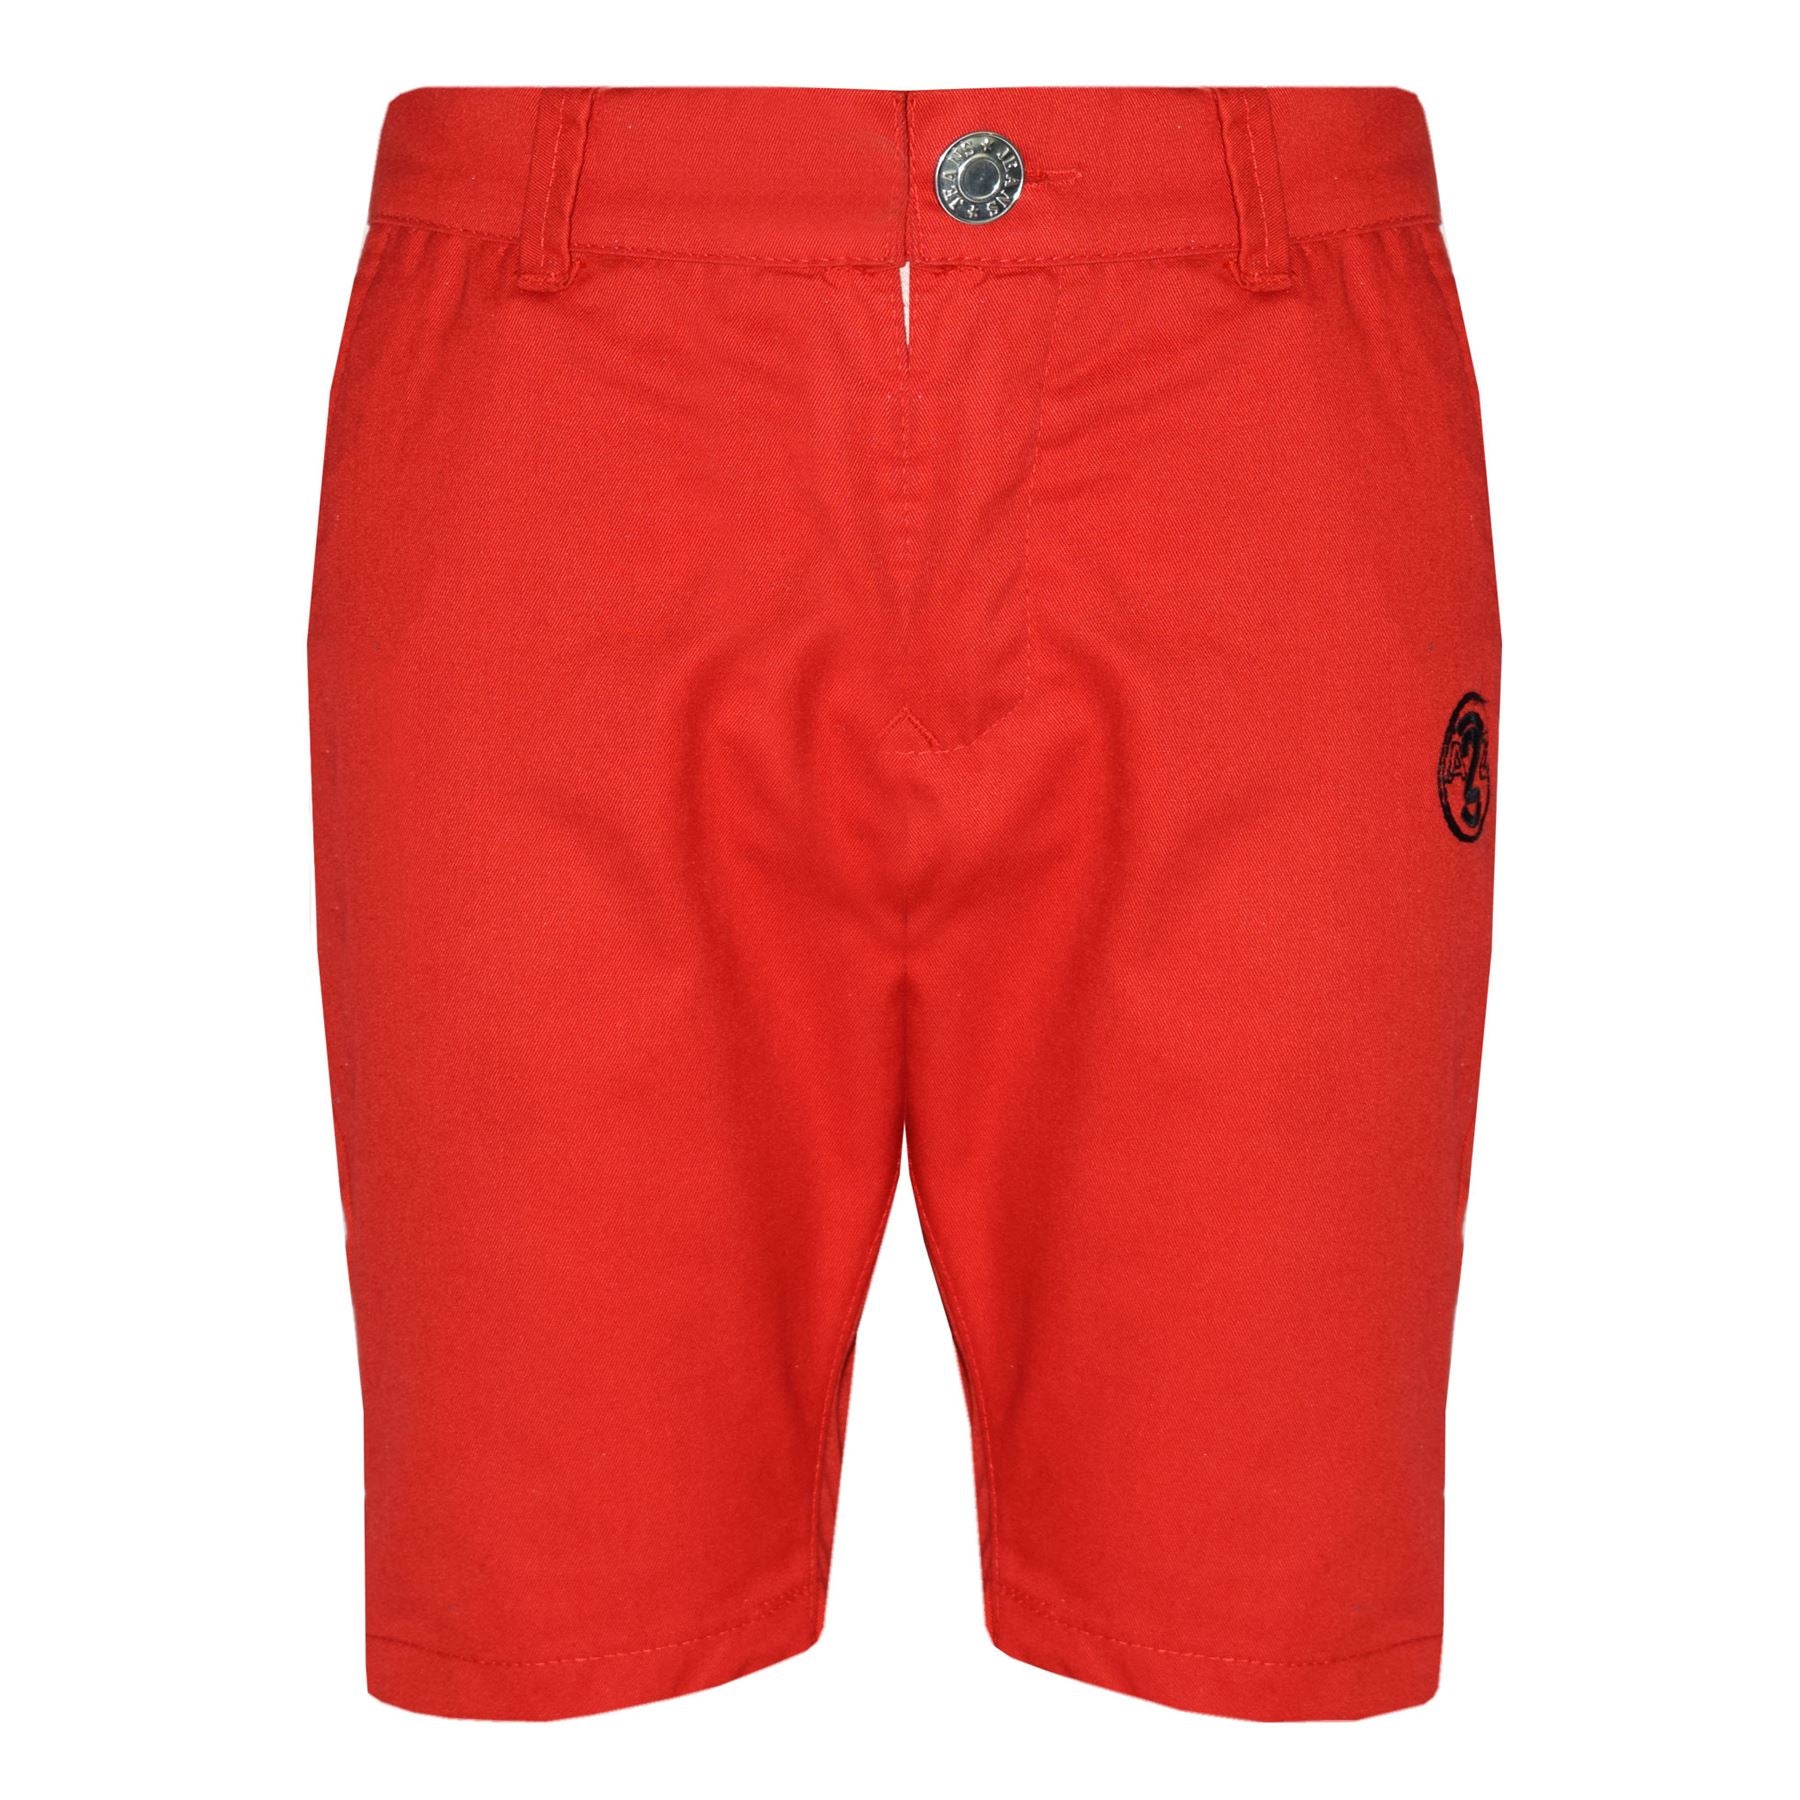 Boys Summer Cotton Shorts Red Chino Knee Length